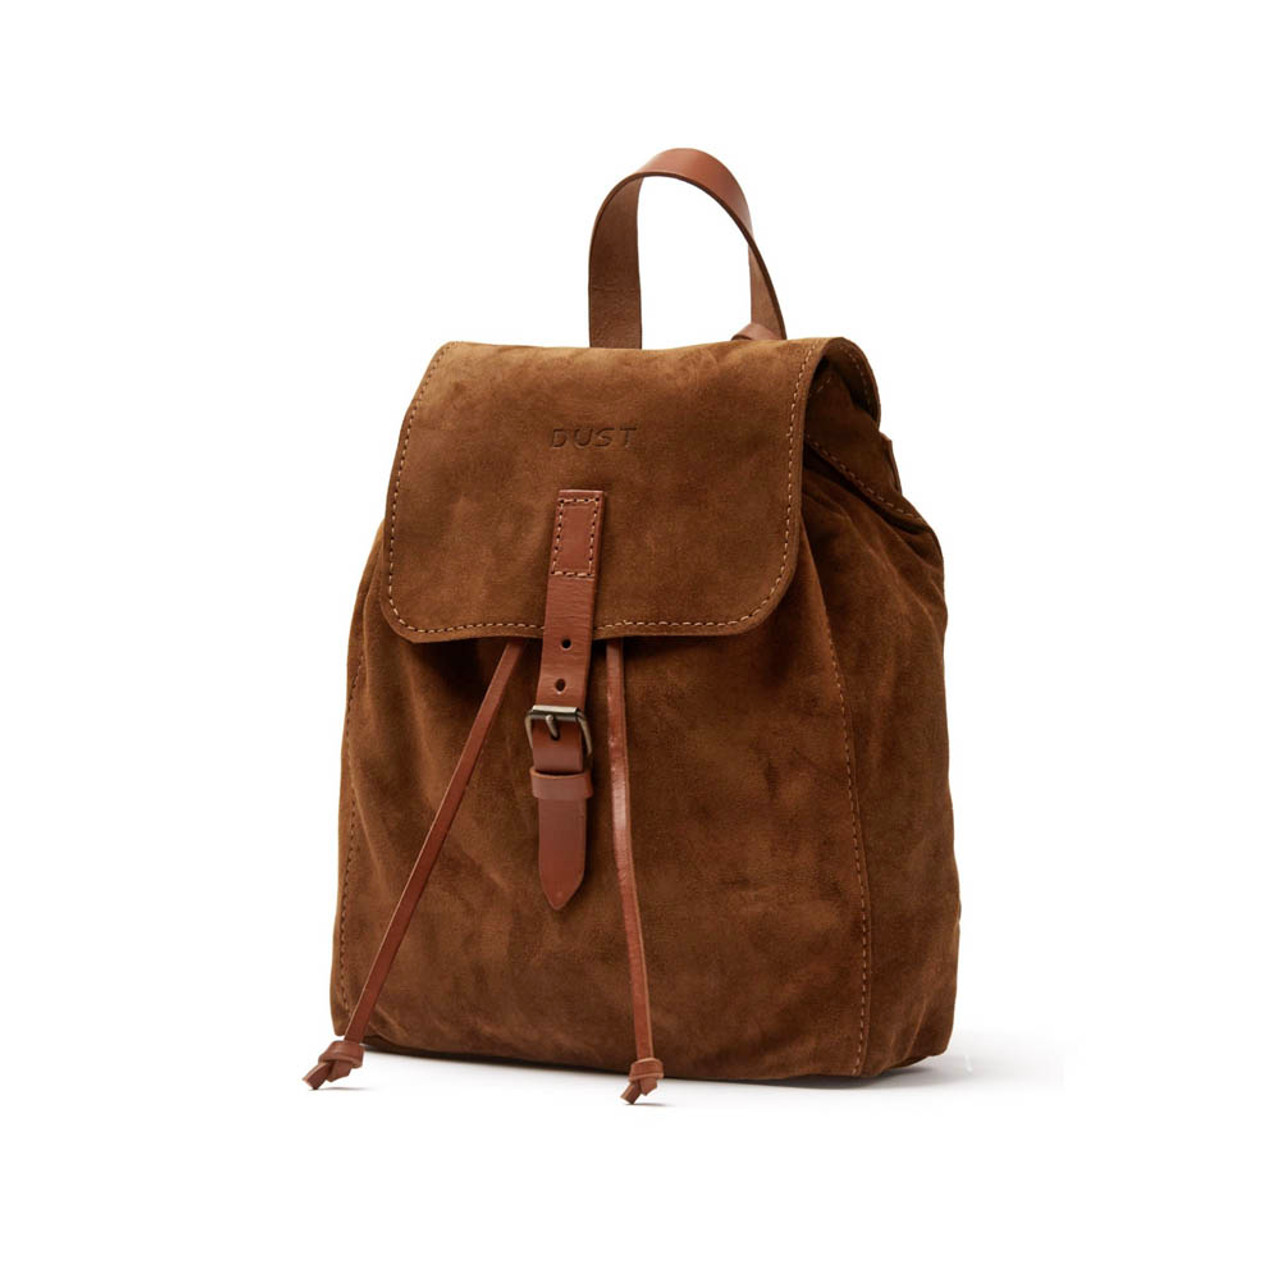 Camp S backpack / Suede - Tabacco